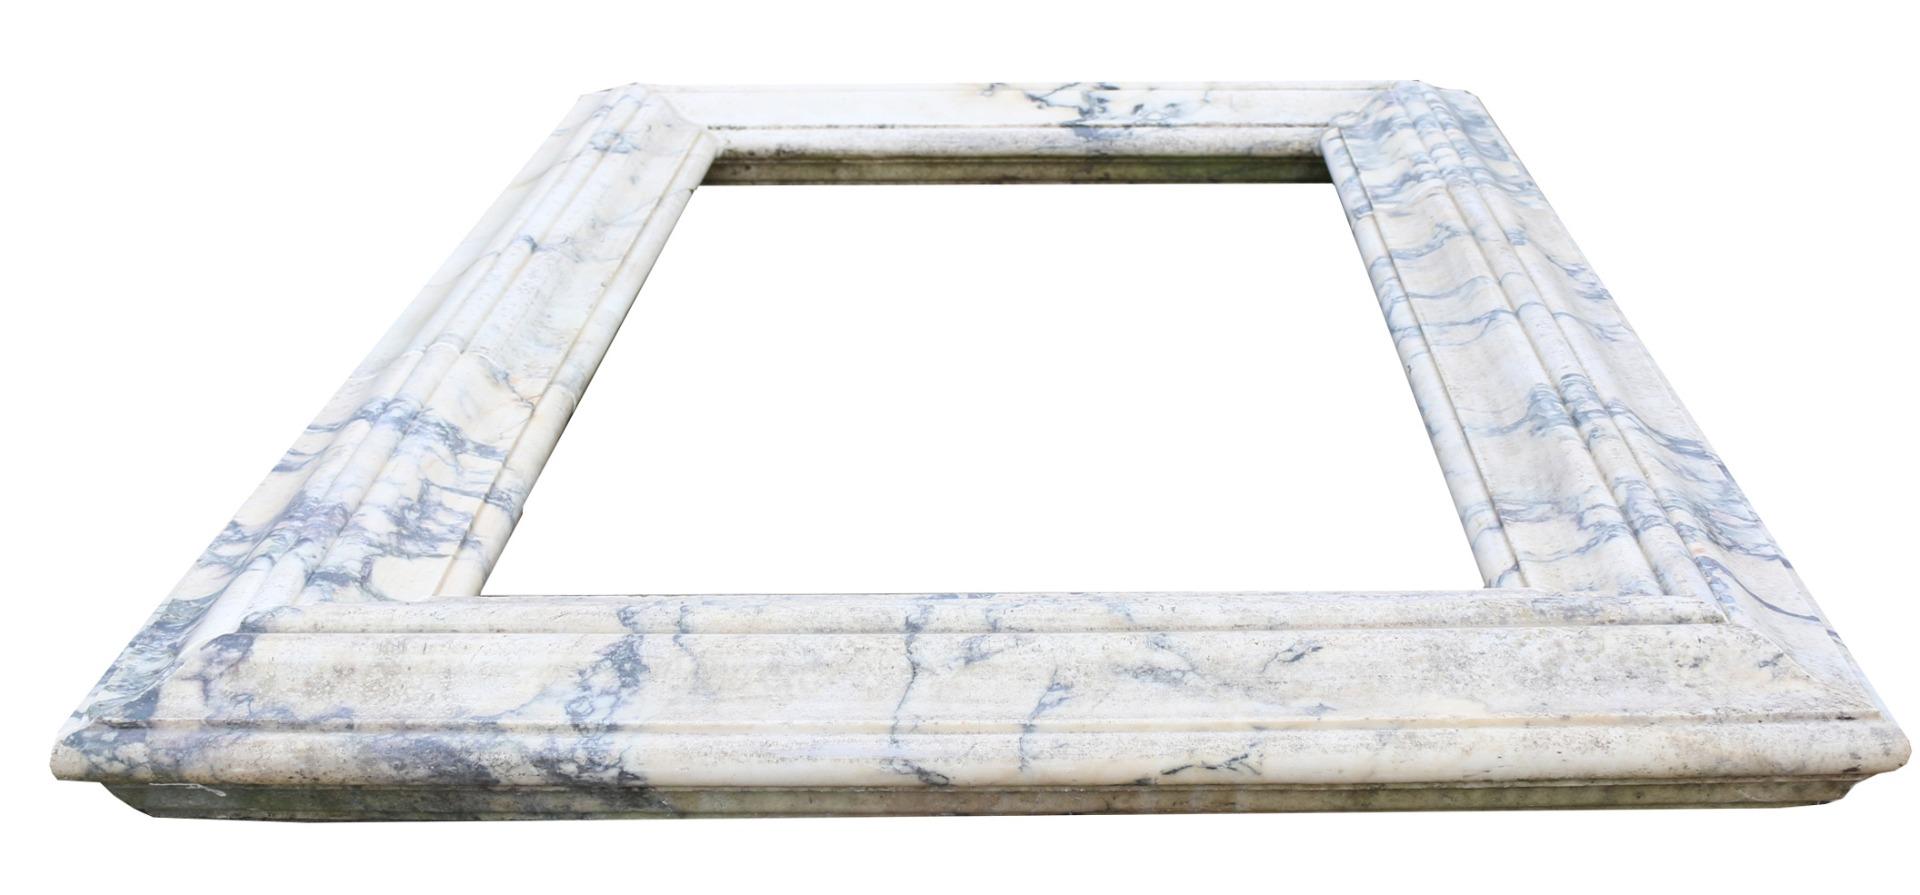 A simple, profiled pool surround, made from Italian Pavonazzo Marble.

External size 207 cm x 140.5 cm

Internal size 152 cm x 86 cm

Profile H 14 cm x W 27 cm.